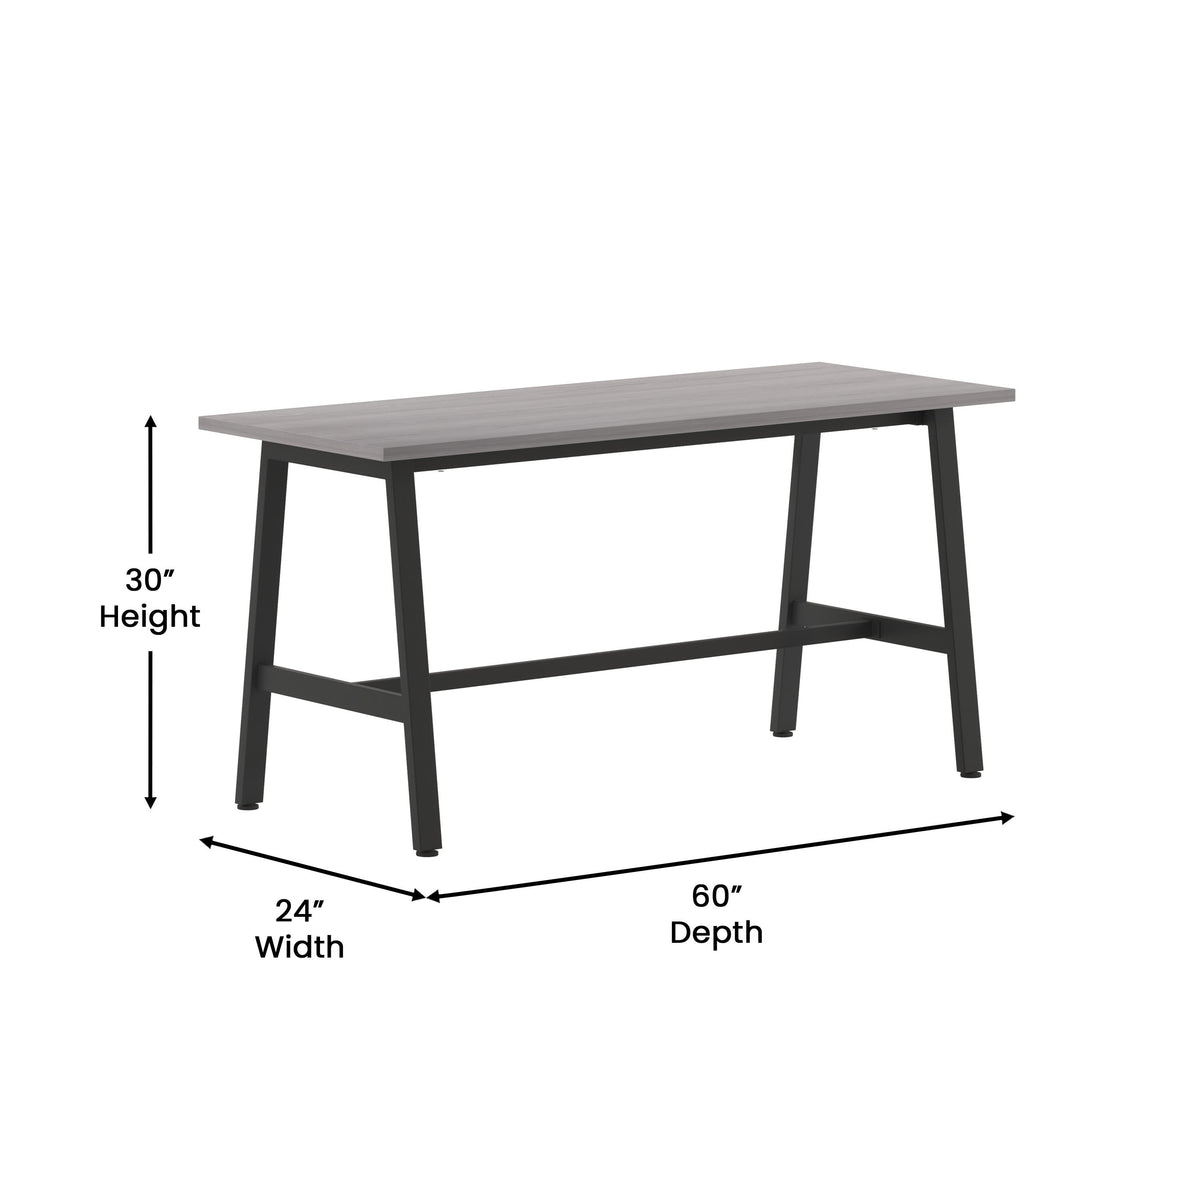 Gray Oak |#| Commercial 60x24 Conference Table with Laminate Top and A-Frame Base - Gray Oak